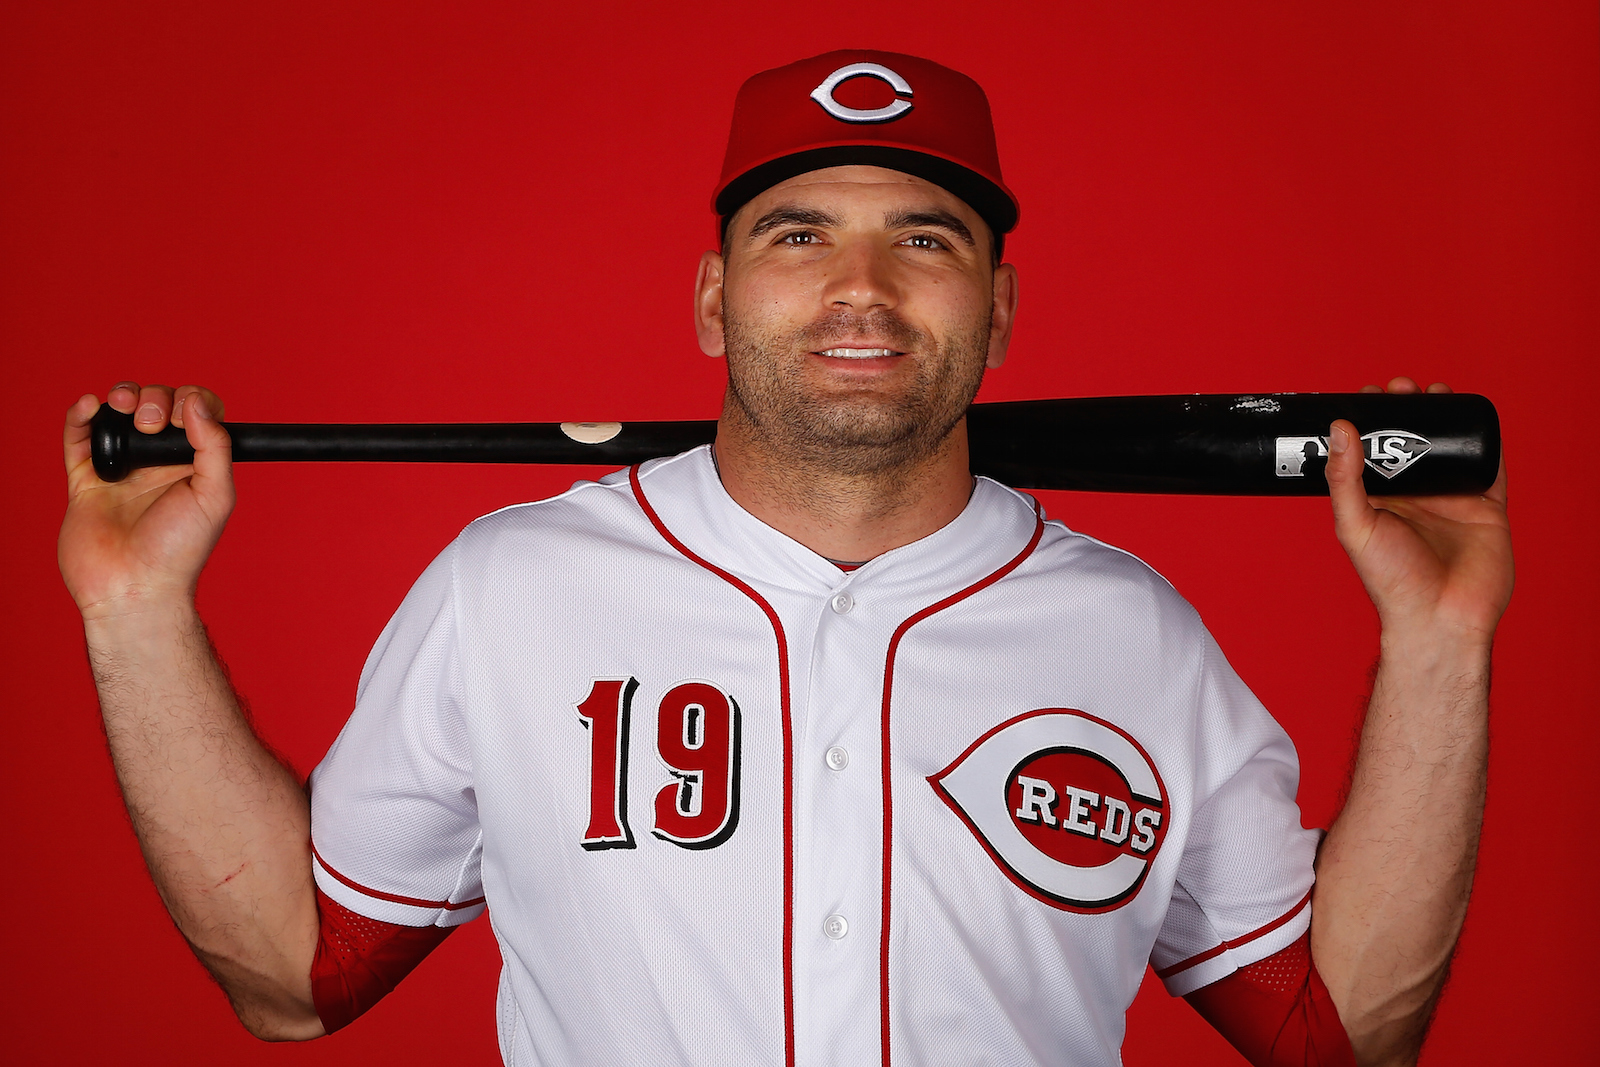 Votto among finalists for National League Most Valuable Player